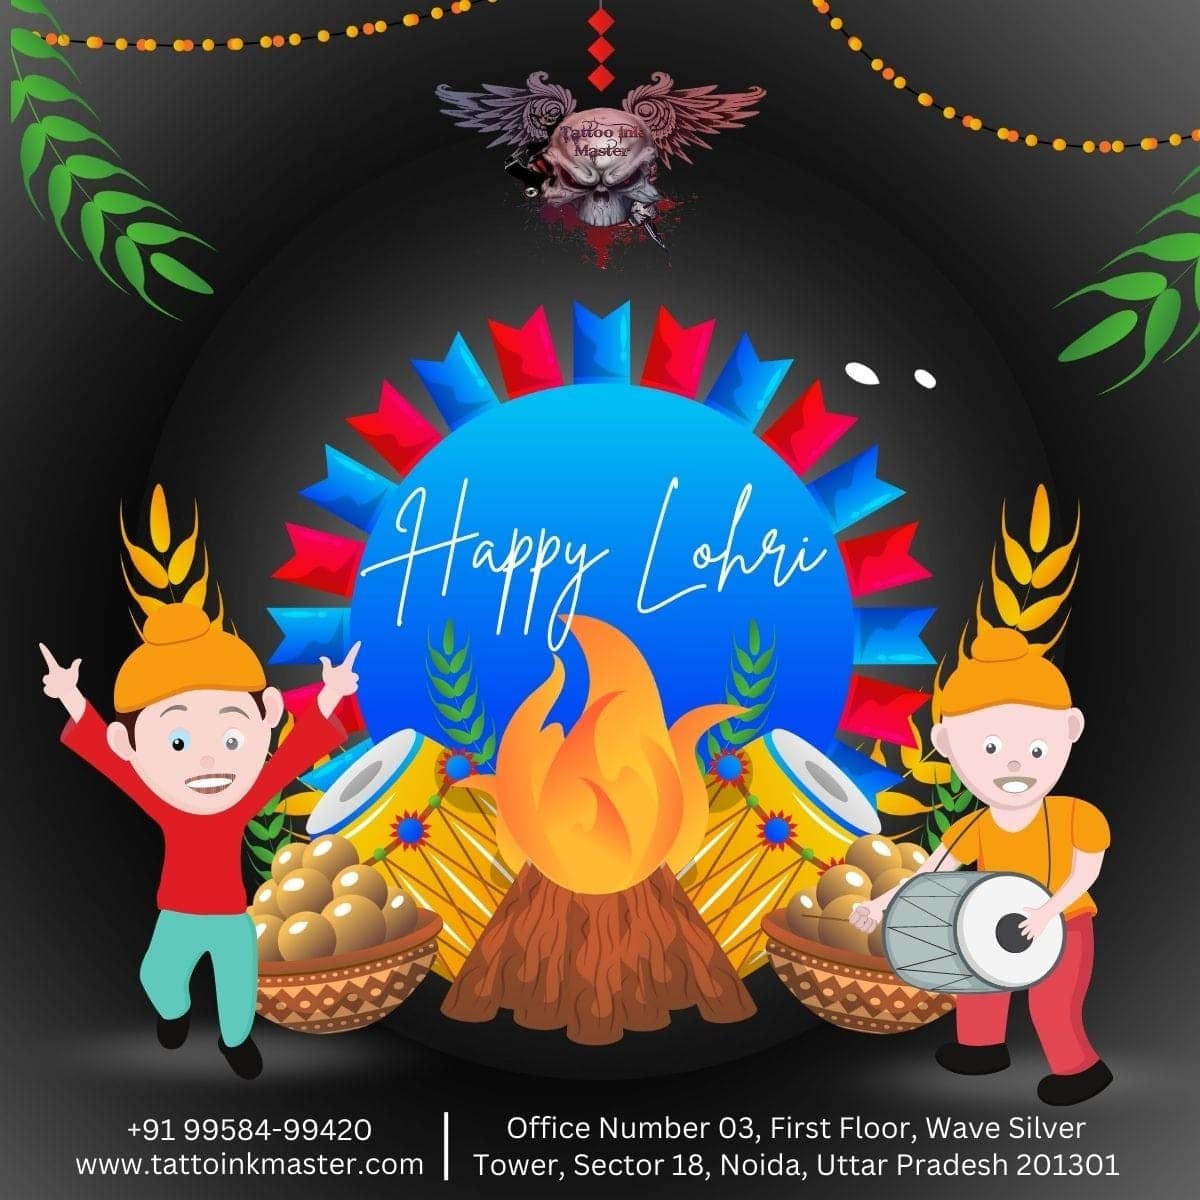 You are currently viewing Wishing You A Very Happy Lohri From Tattoo Ink Master